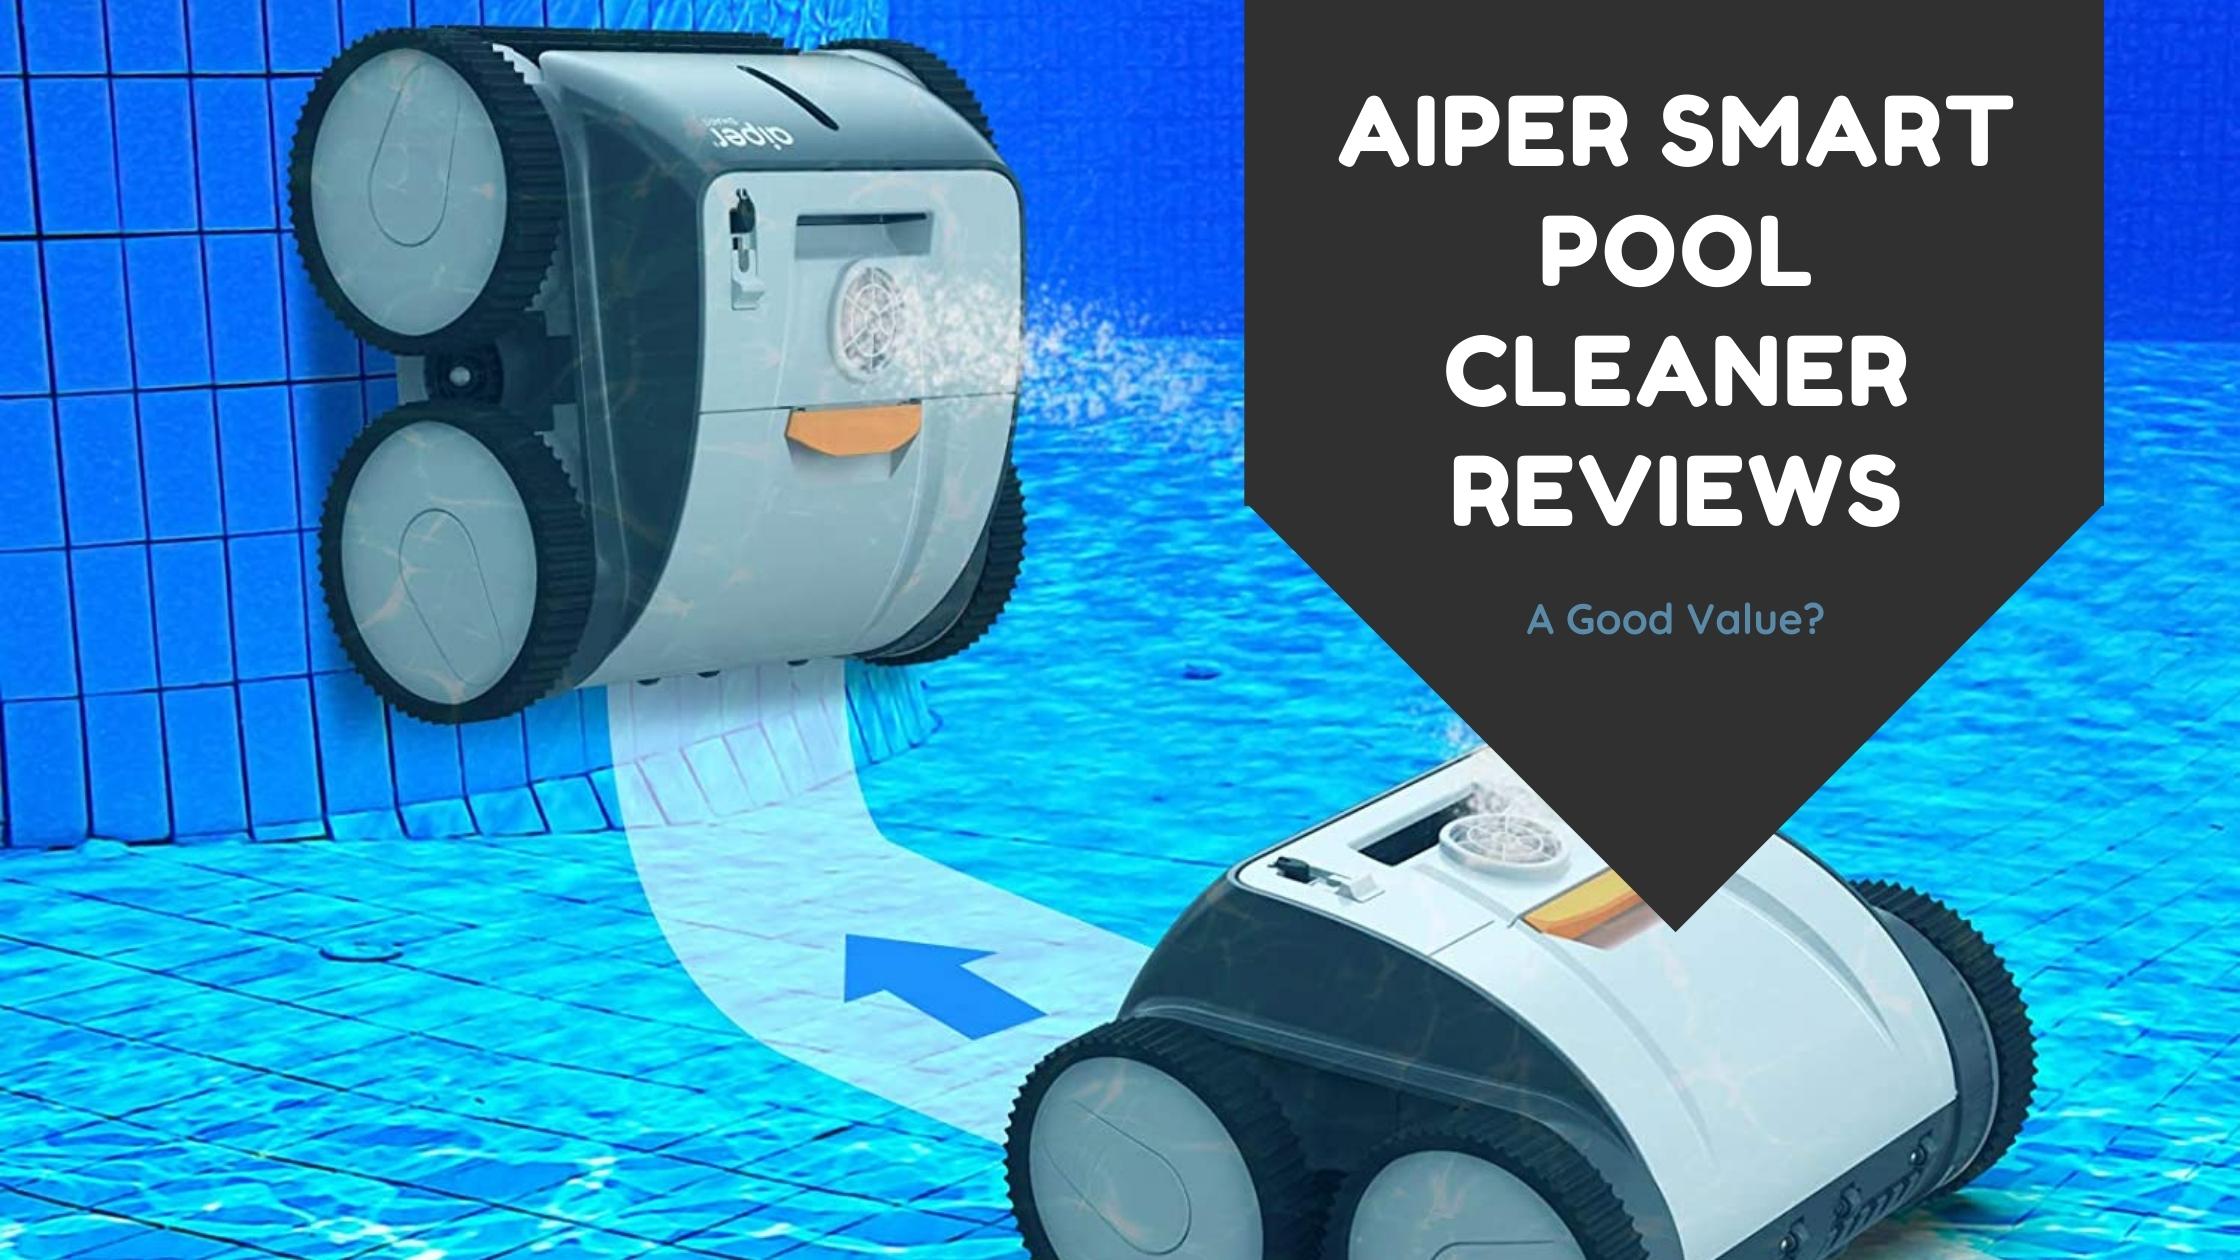 Aiper Smart Pool Cleaner Reviews: A Good Value?